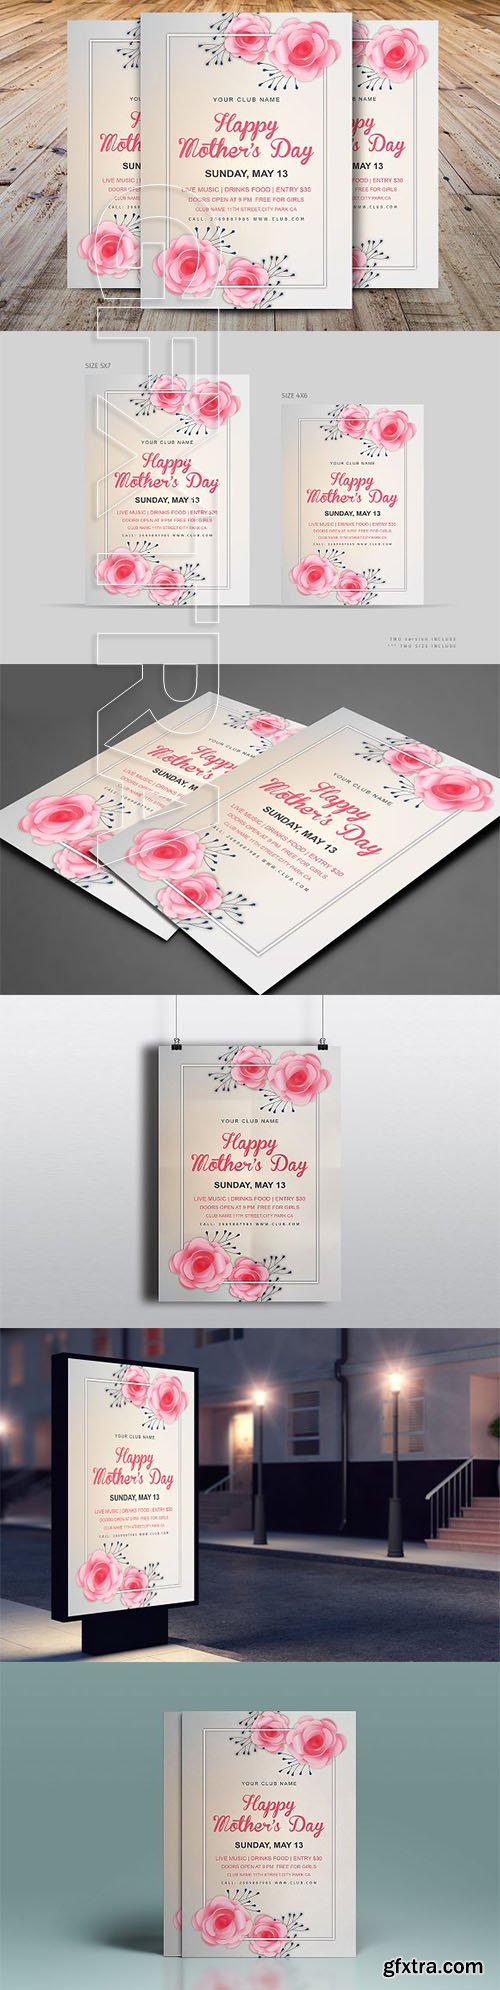 CreativeMarket - Mothers Day Invitation Template 2443044